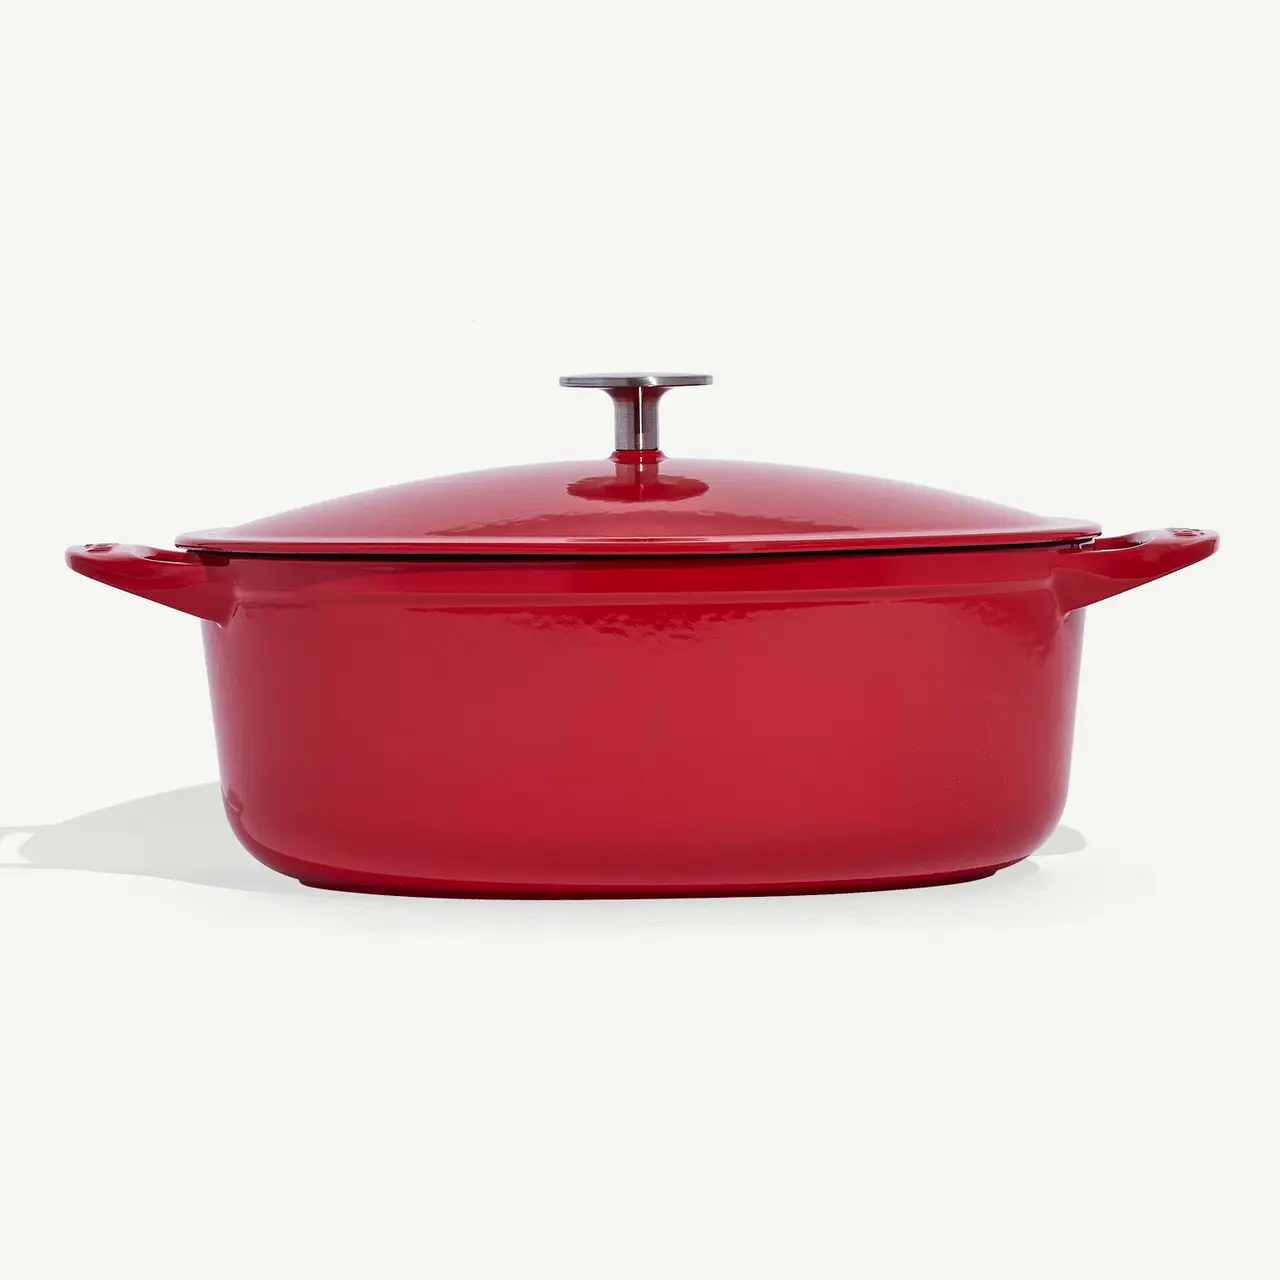 A red enameled cast iron Dutch oven with a lid on a white background.